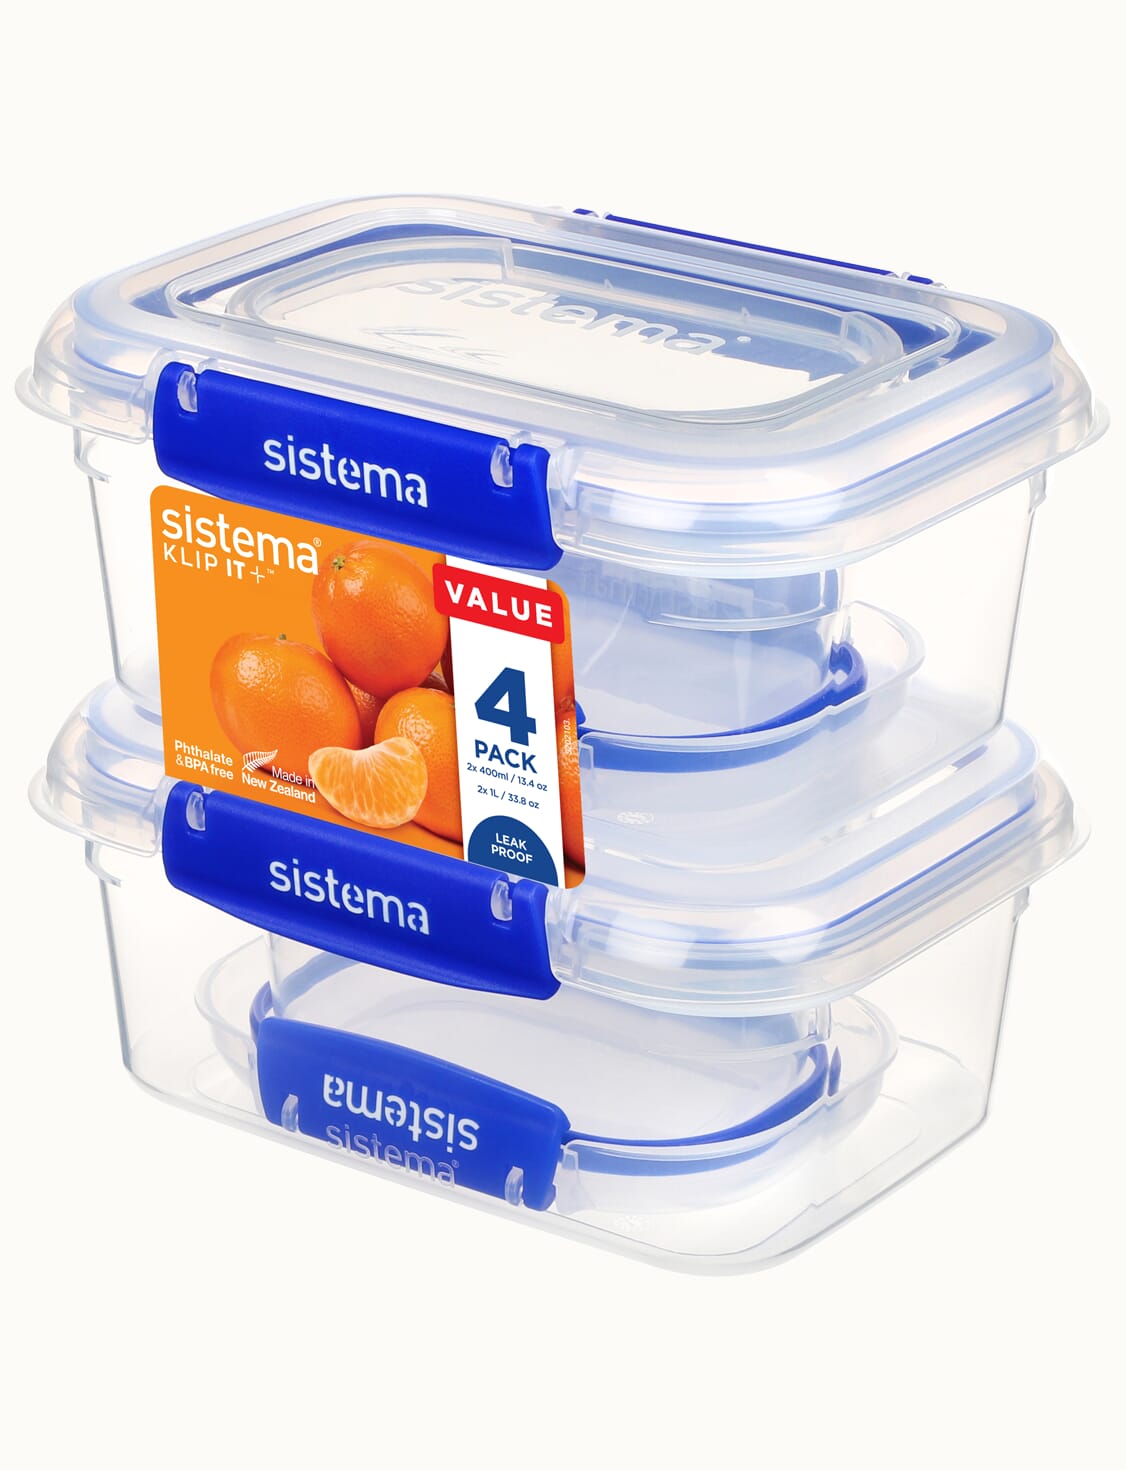 Sistema Food Storage Container, 4 Compartments, Made in New Zealand